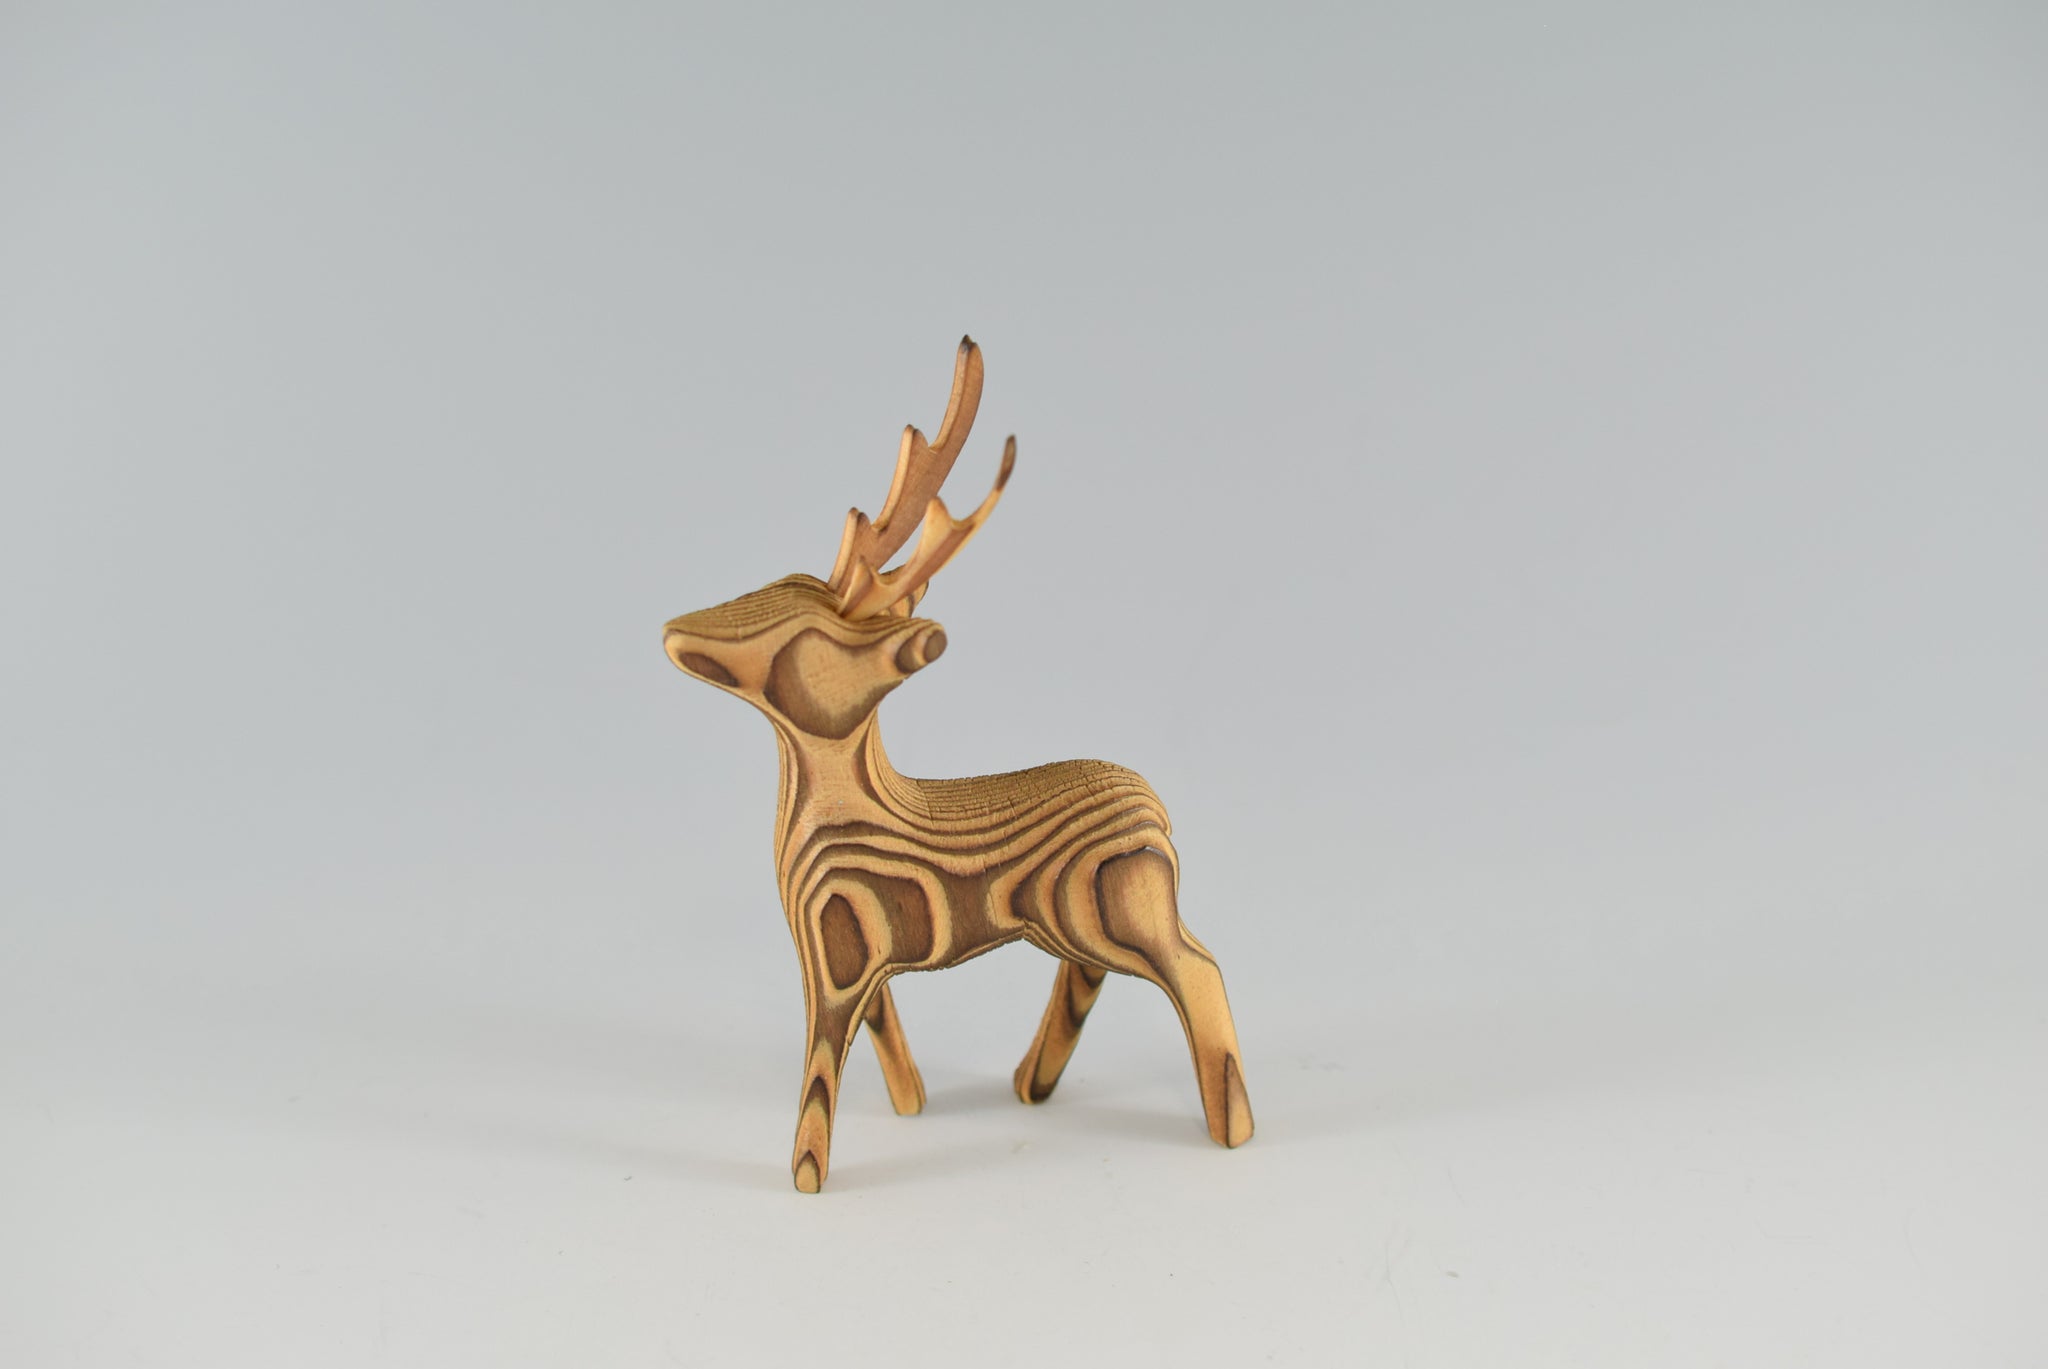 Japanese Traditional Wood Carving of a Deer Ornament Charms Home Decor